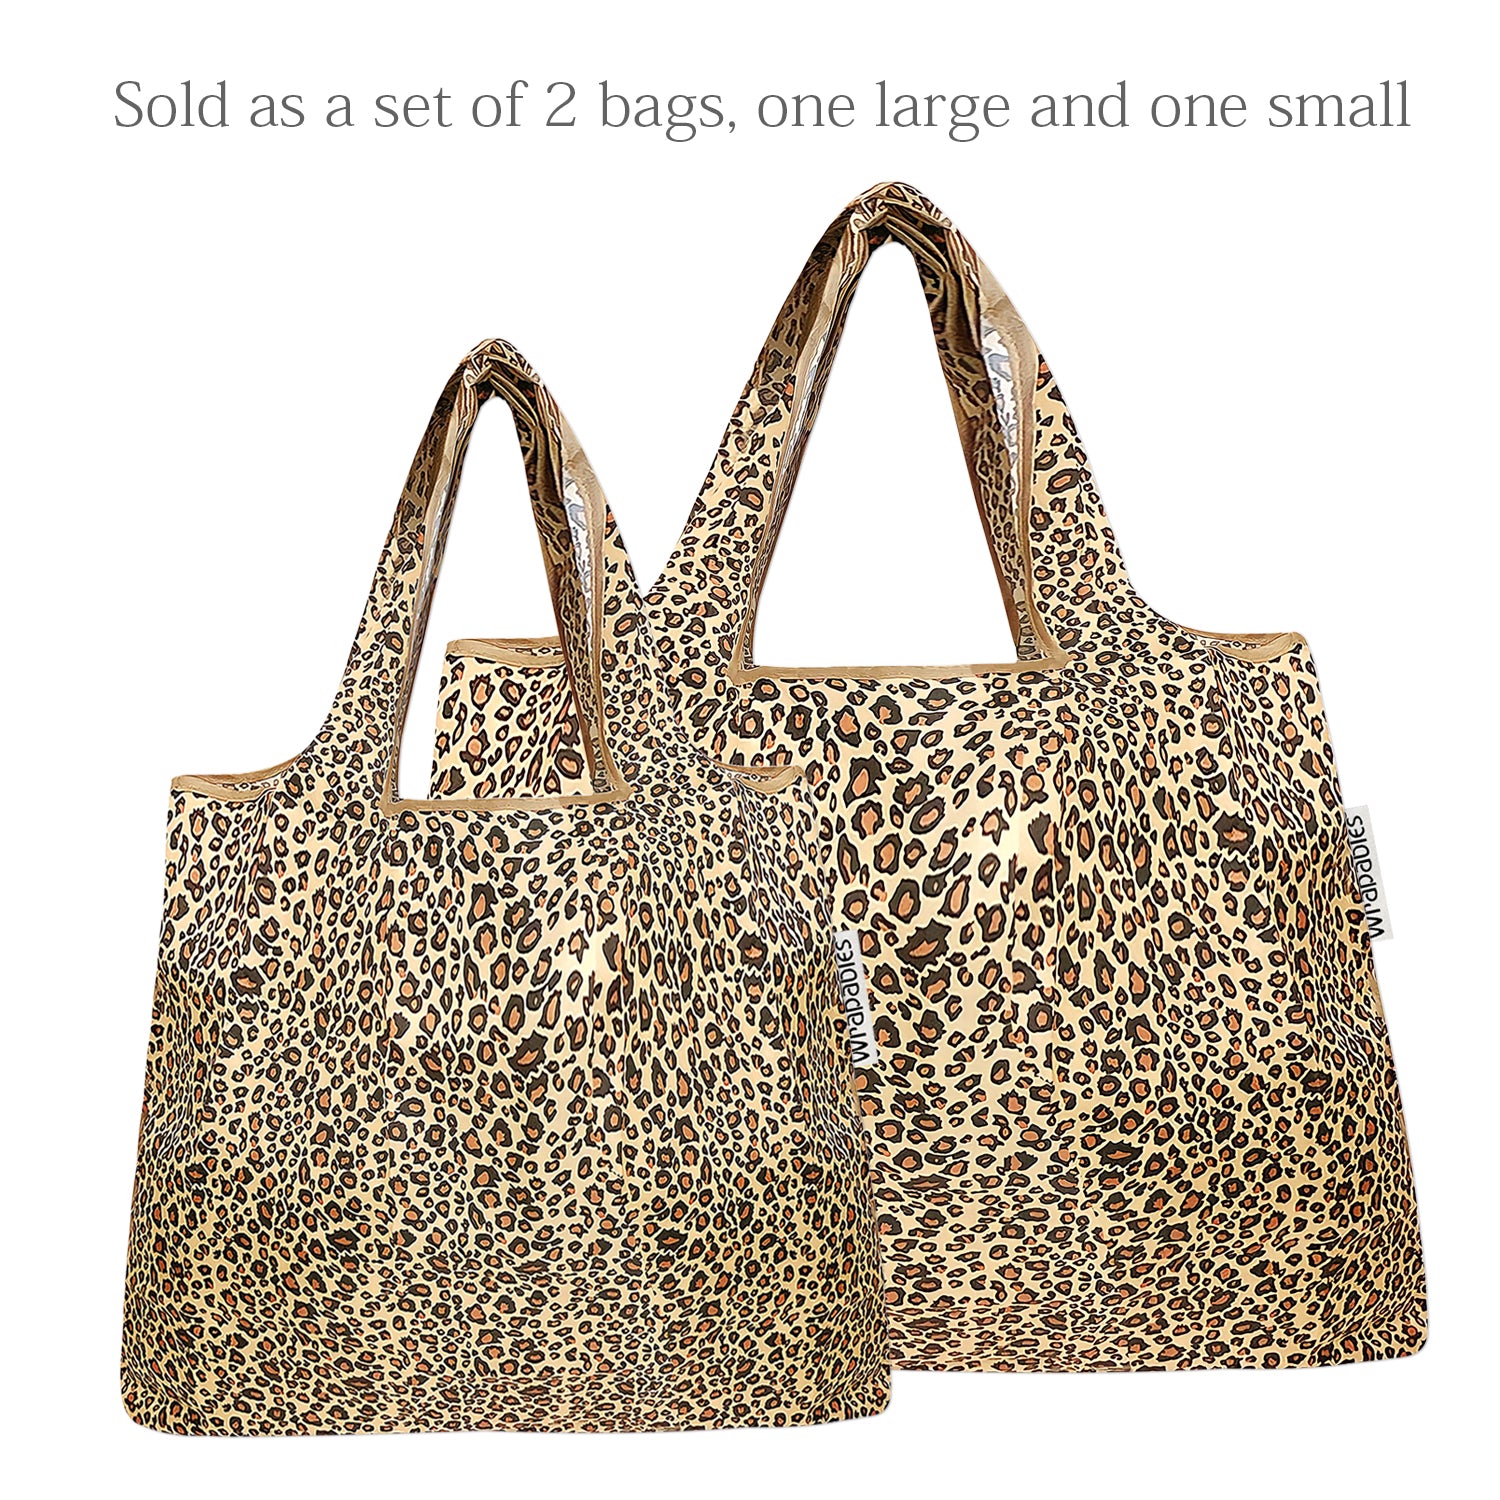 Wrapables Large & Small Foldable Tote Nylon Reusable Grocery Bags, Set of  2, Neutral Felines